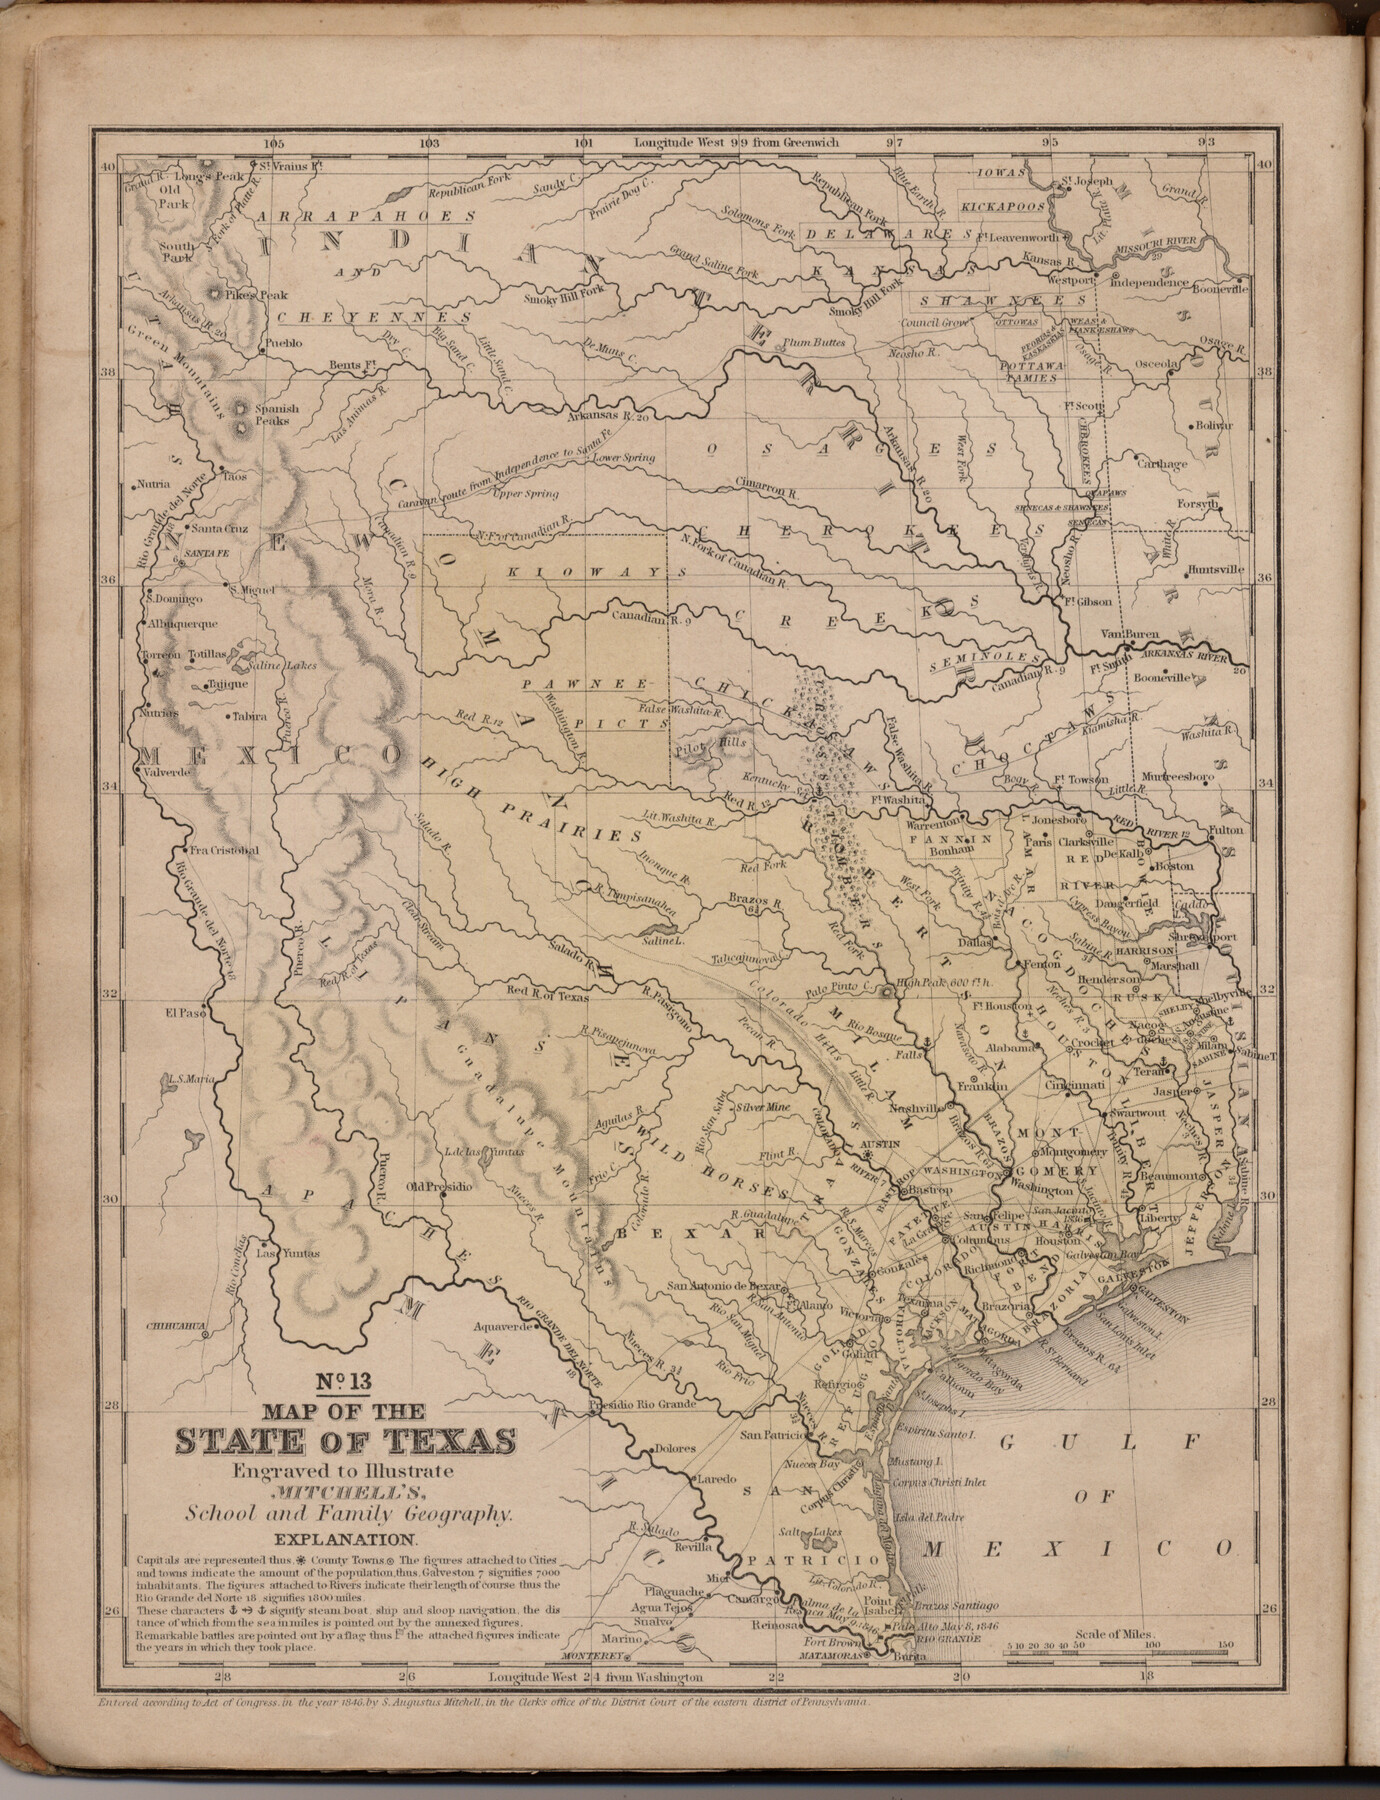 93498, Map of the State of Texas engraved to illustrate Mitchell's school and family geography, General Map Collection